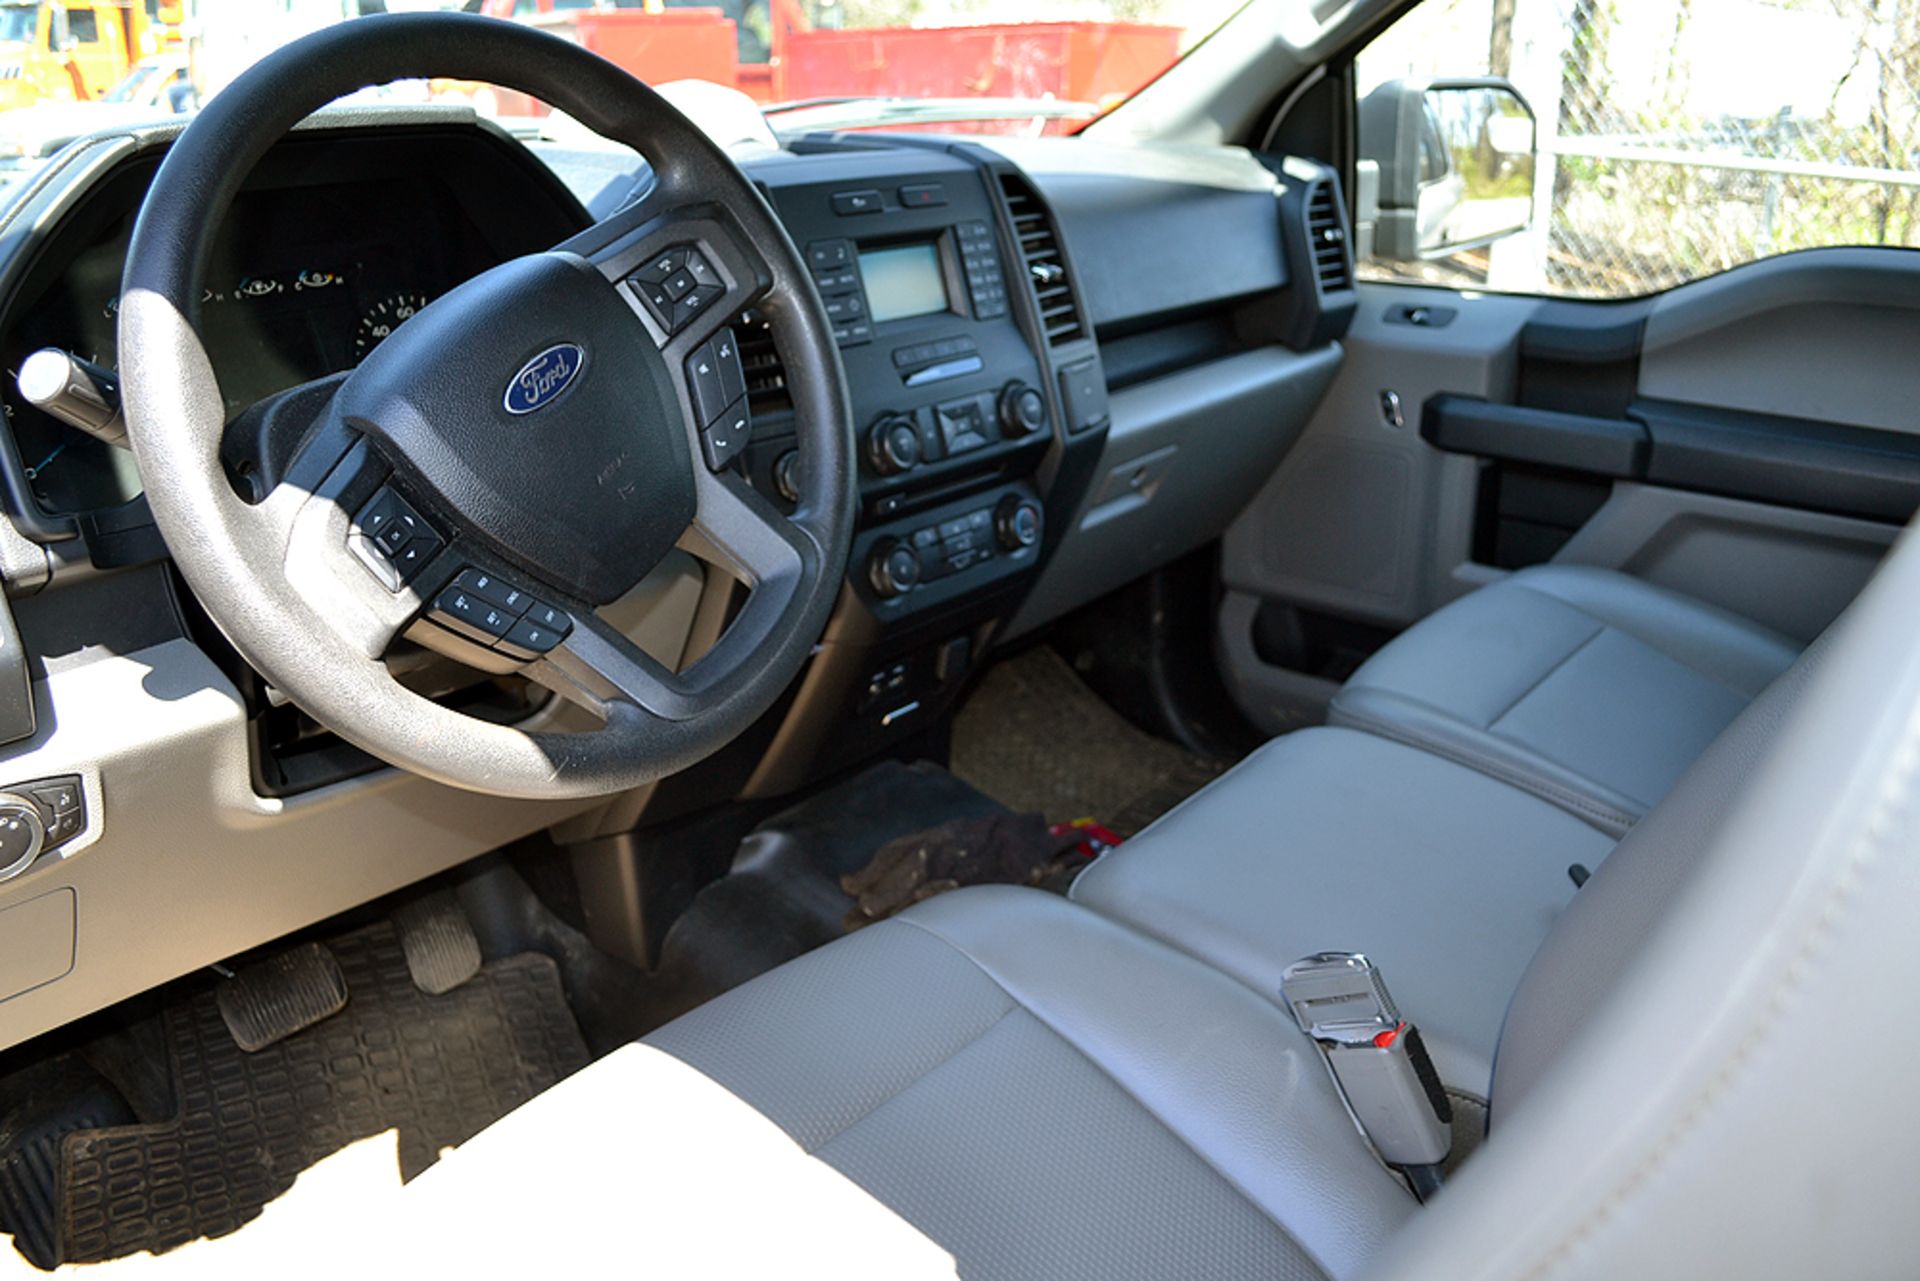 2015 Ford F150 Lariat SuperCab, 4WD Pick Up Truck - Image 7 of 11